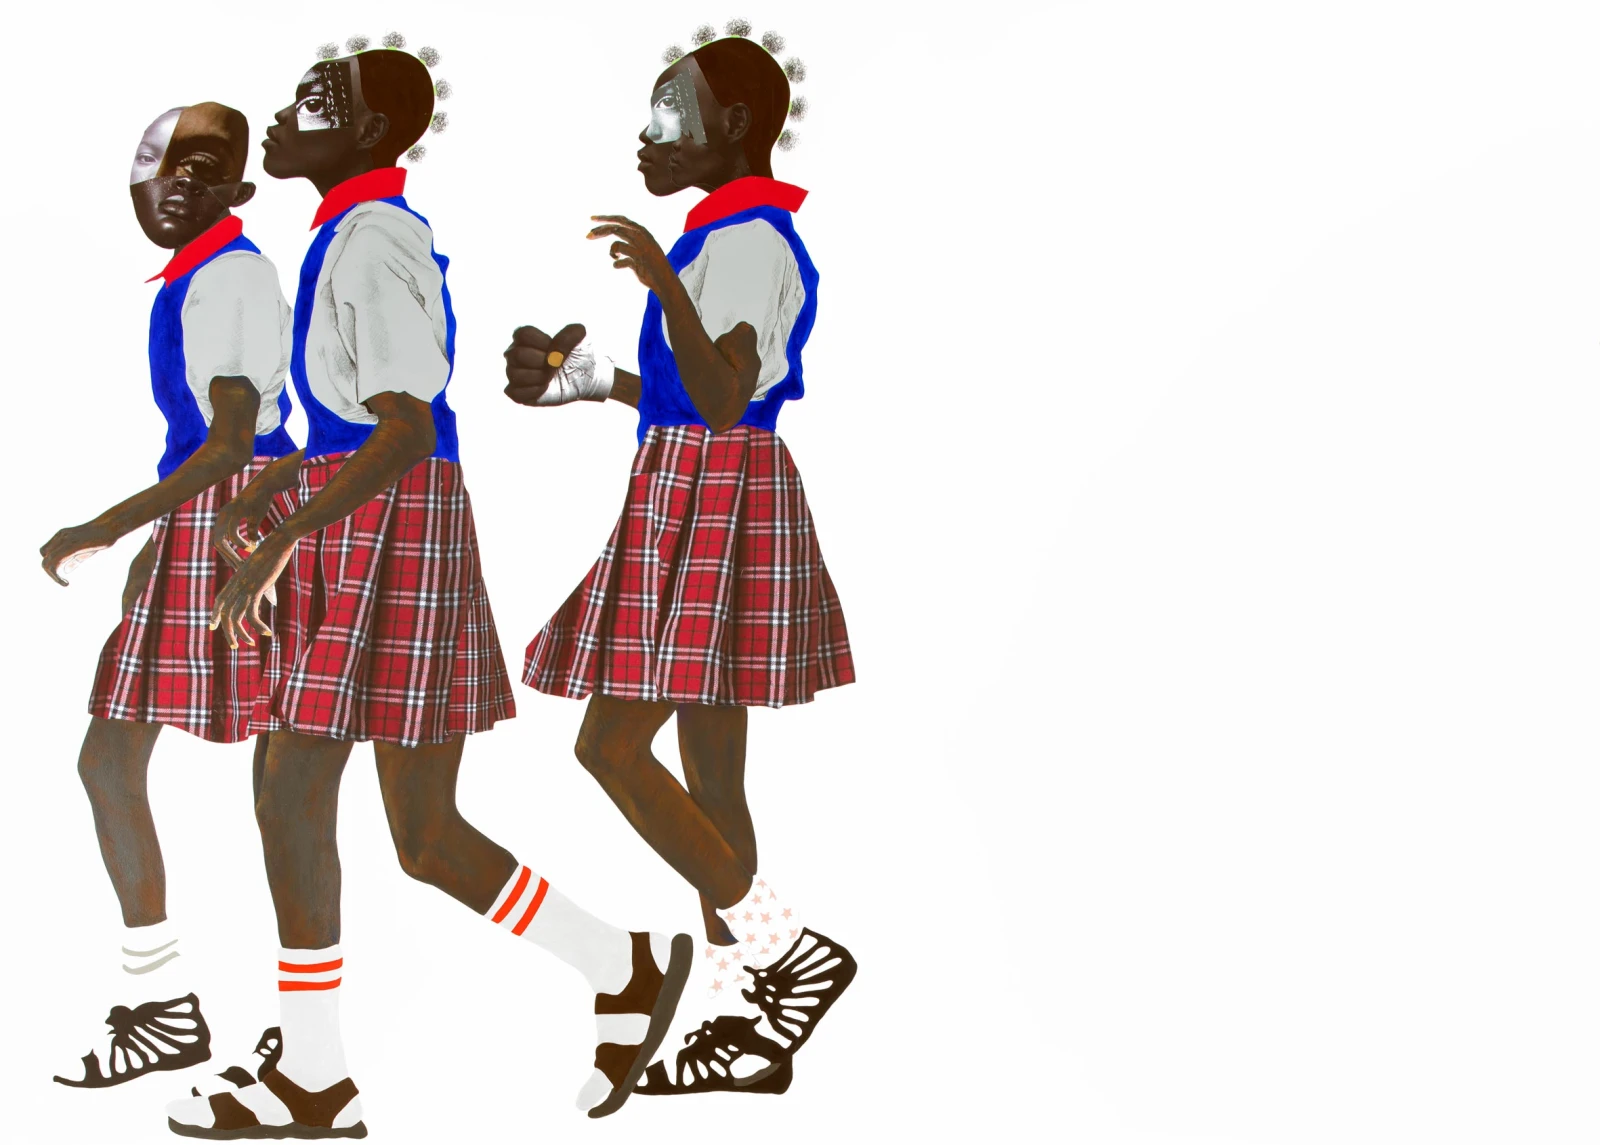 <div>Deborah Roberts, 'We are soldiers', 2019, Collection of the MFA Boston, MA.</div>